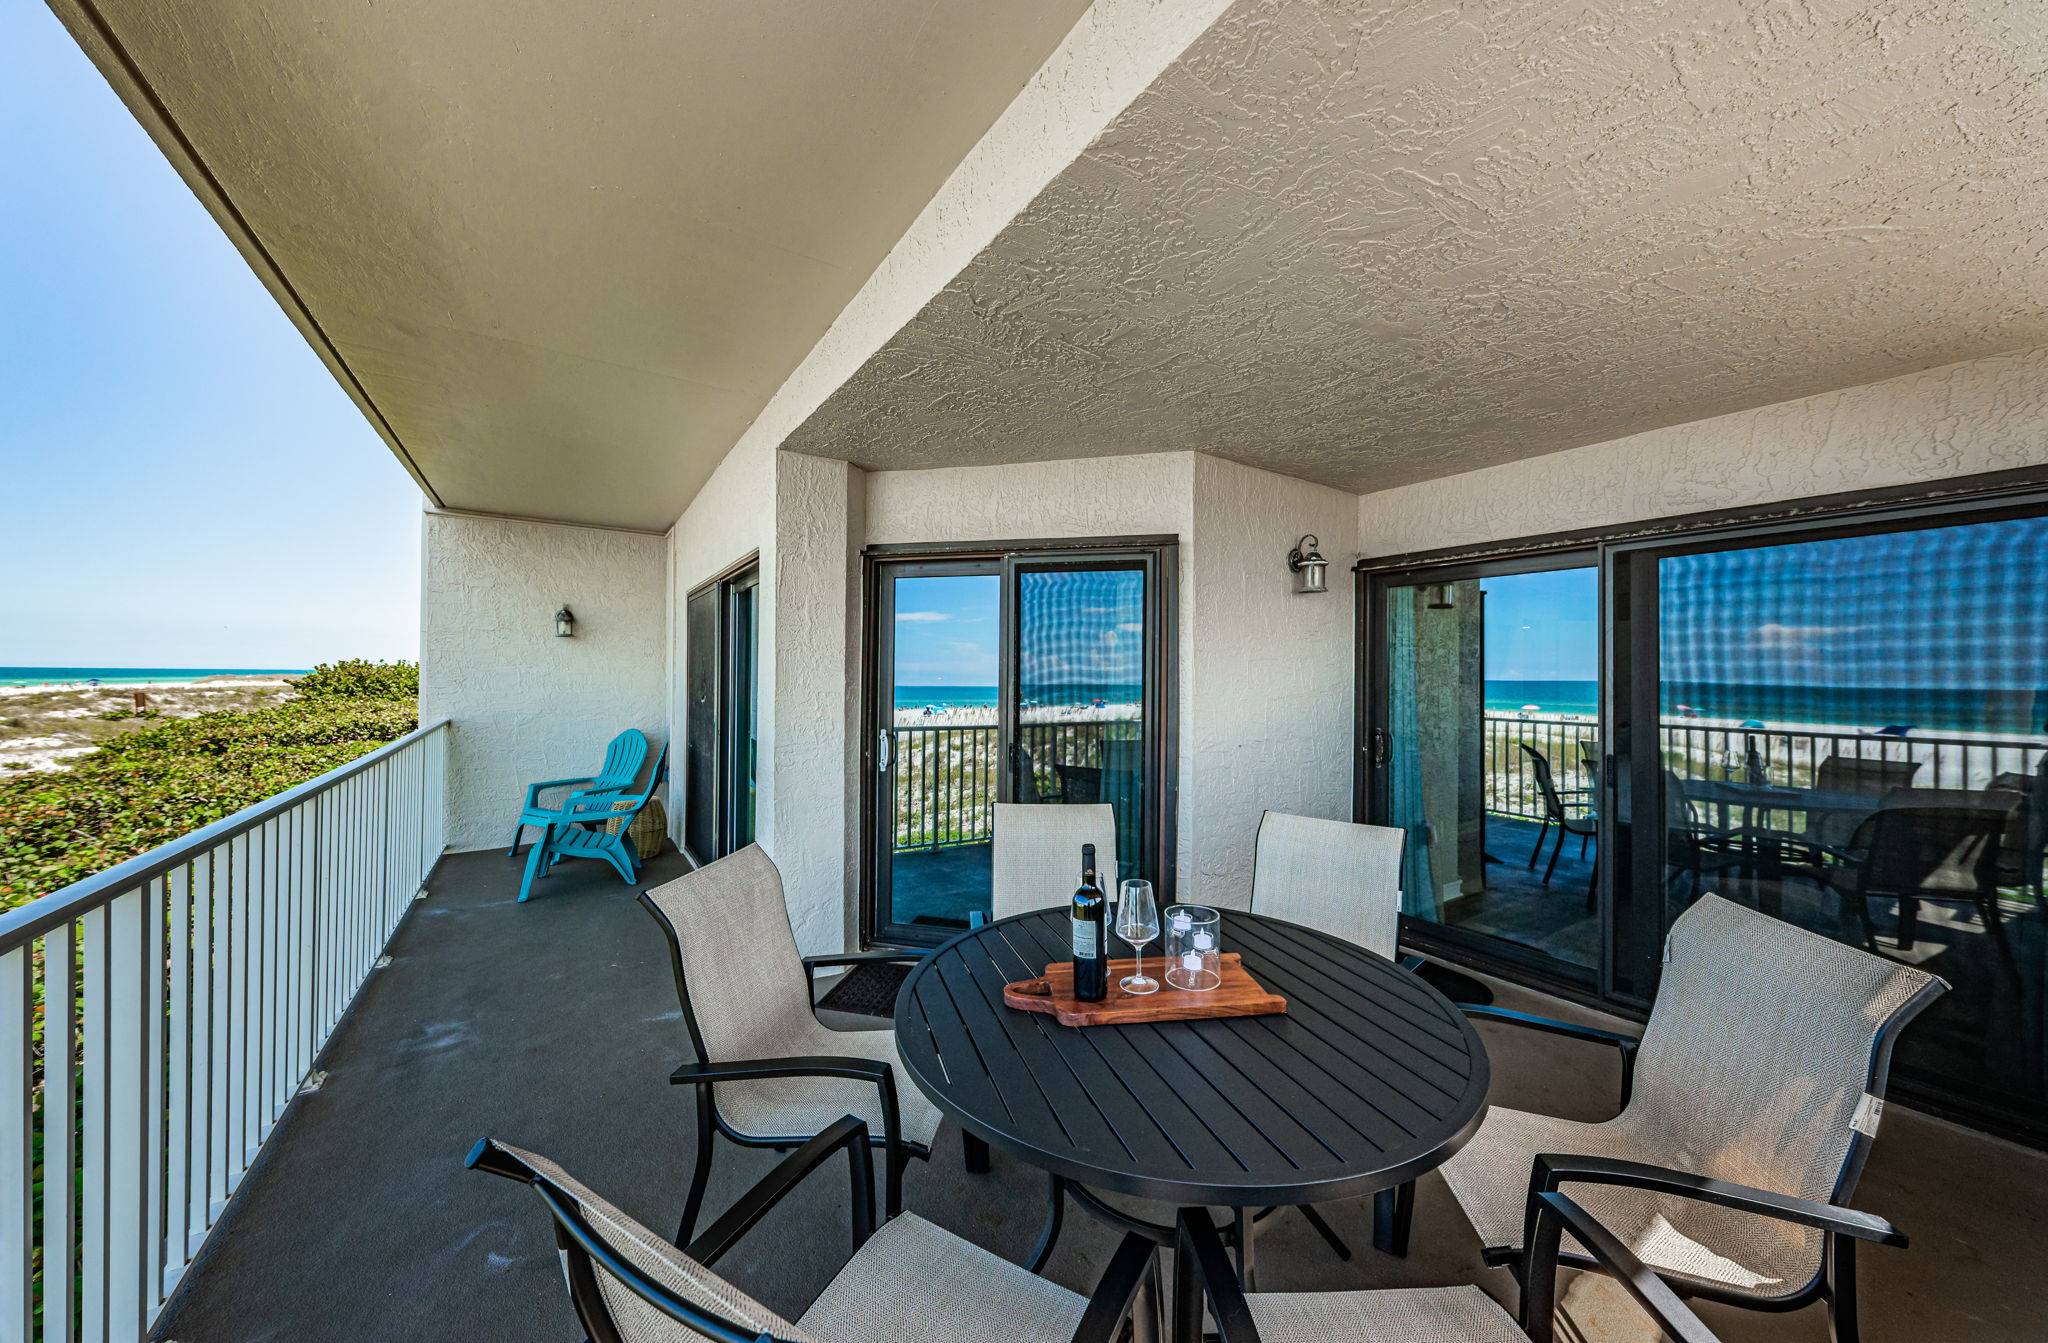 Villas of Clearwater Beach - Unit A1 - Clearwater Vacation Rentals ...